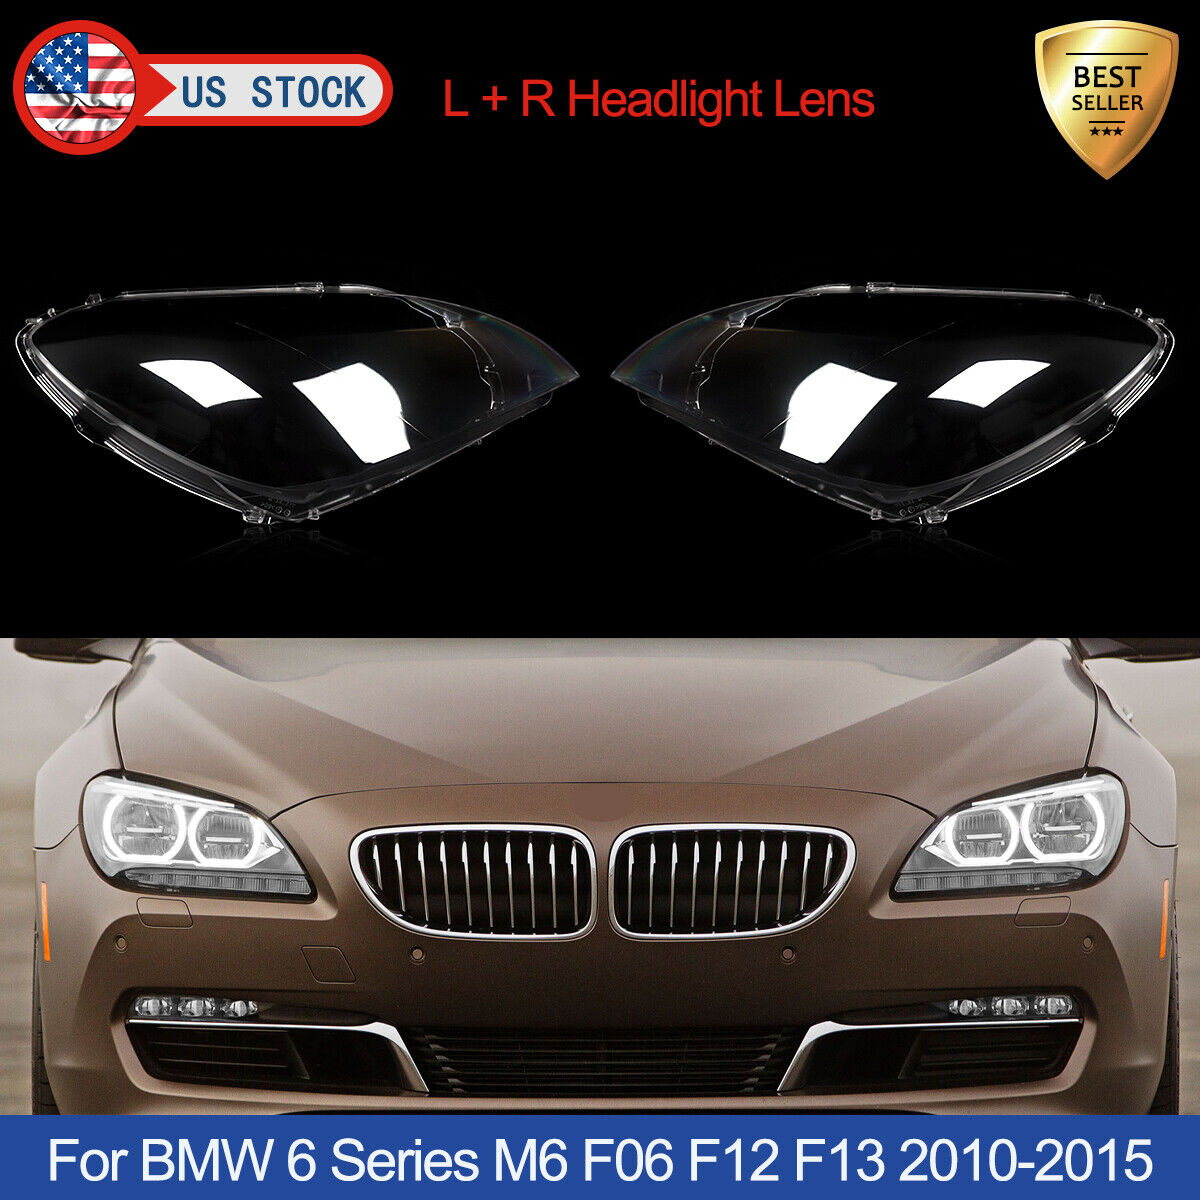 For BMW 6 Series M6 F06 F12 F13 640i 650i Left Right Headlight Lens Cover Clear